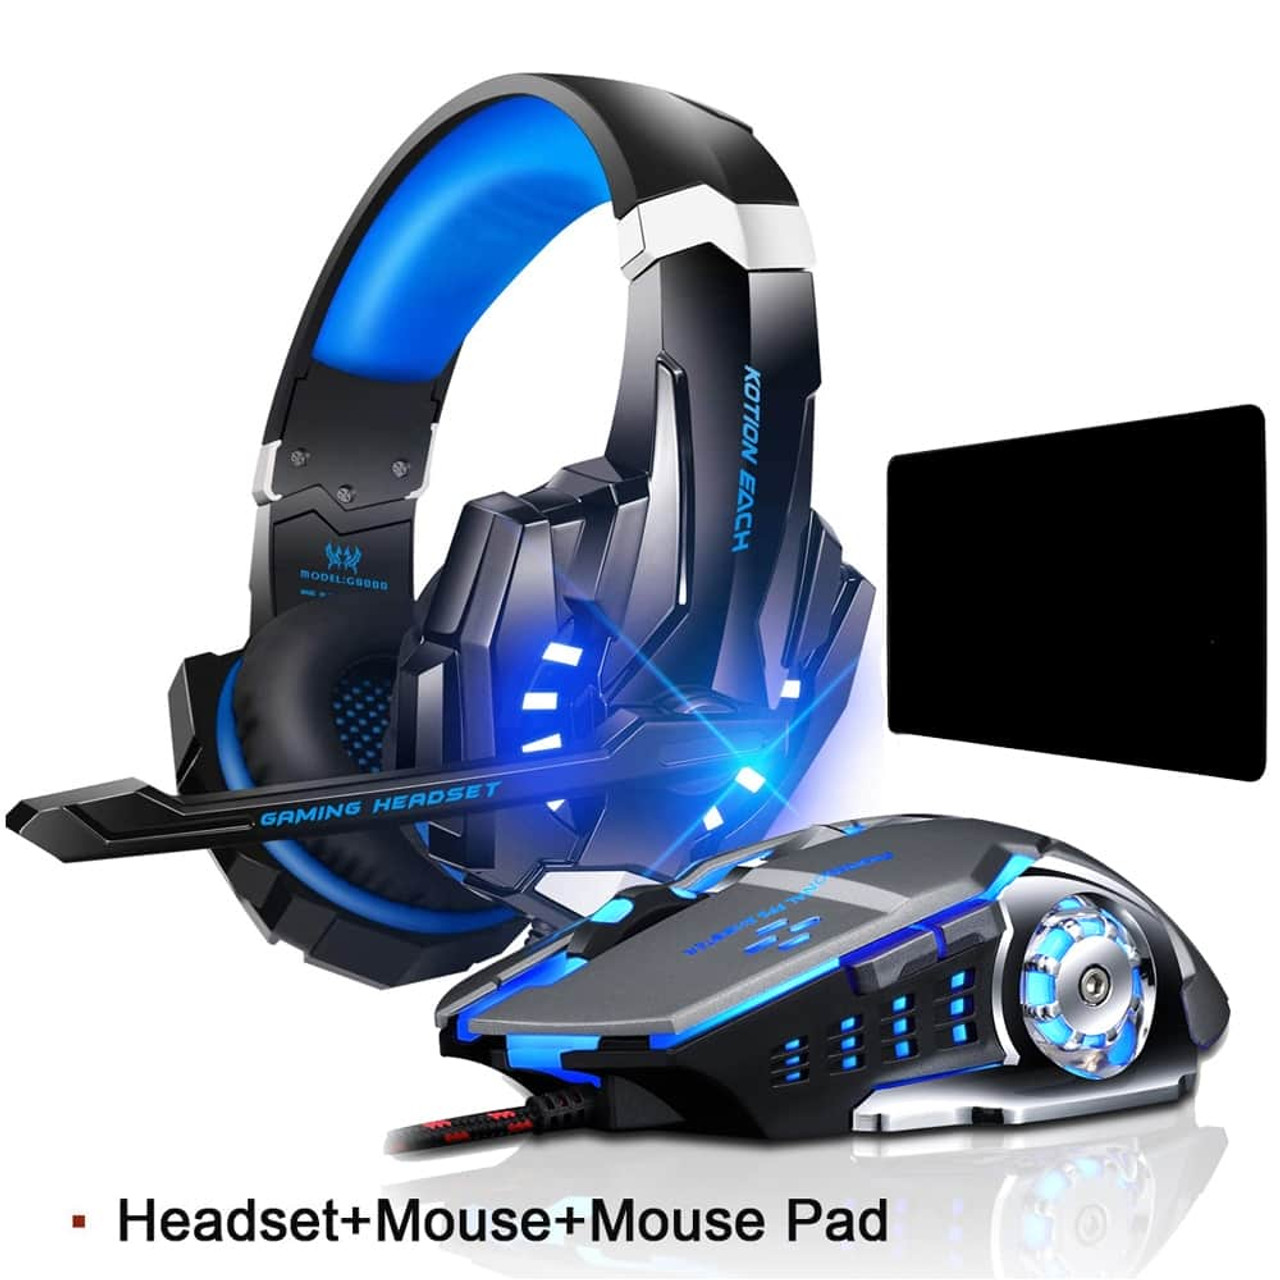 Kotion EACH G9000 Gaming Headset Deep Bass Stereo Game Headphone with Microphone LED Light